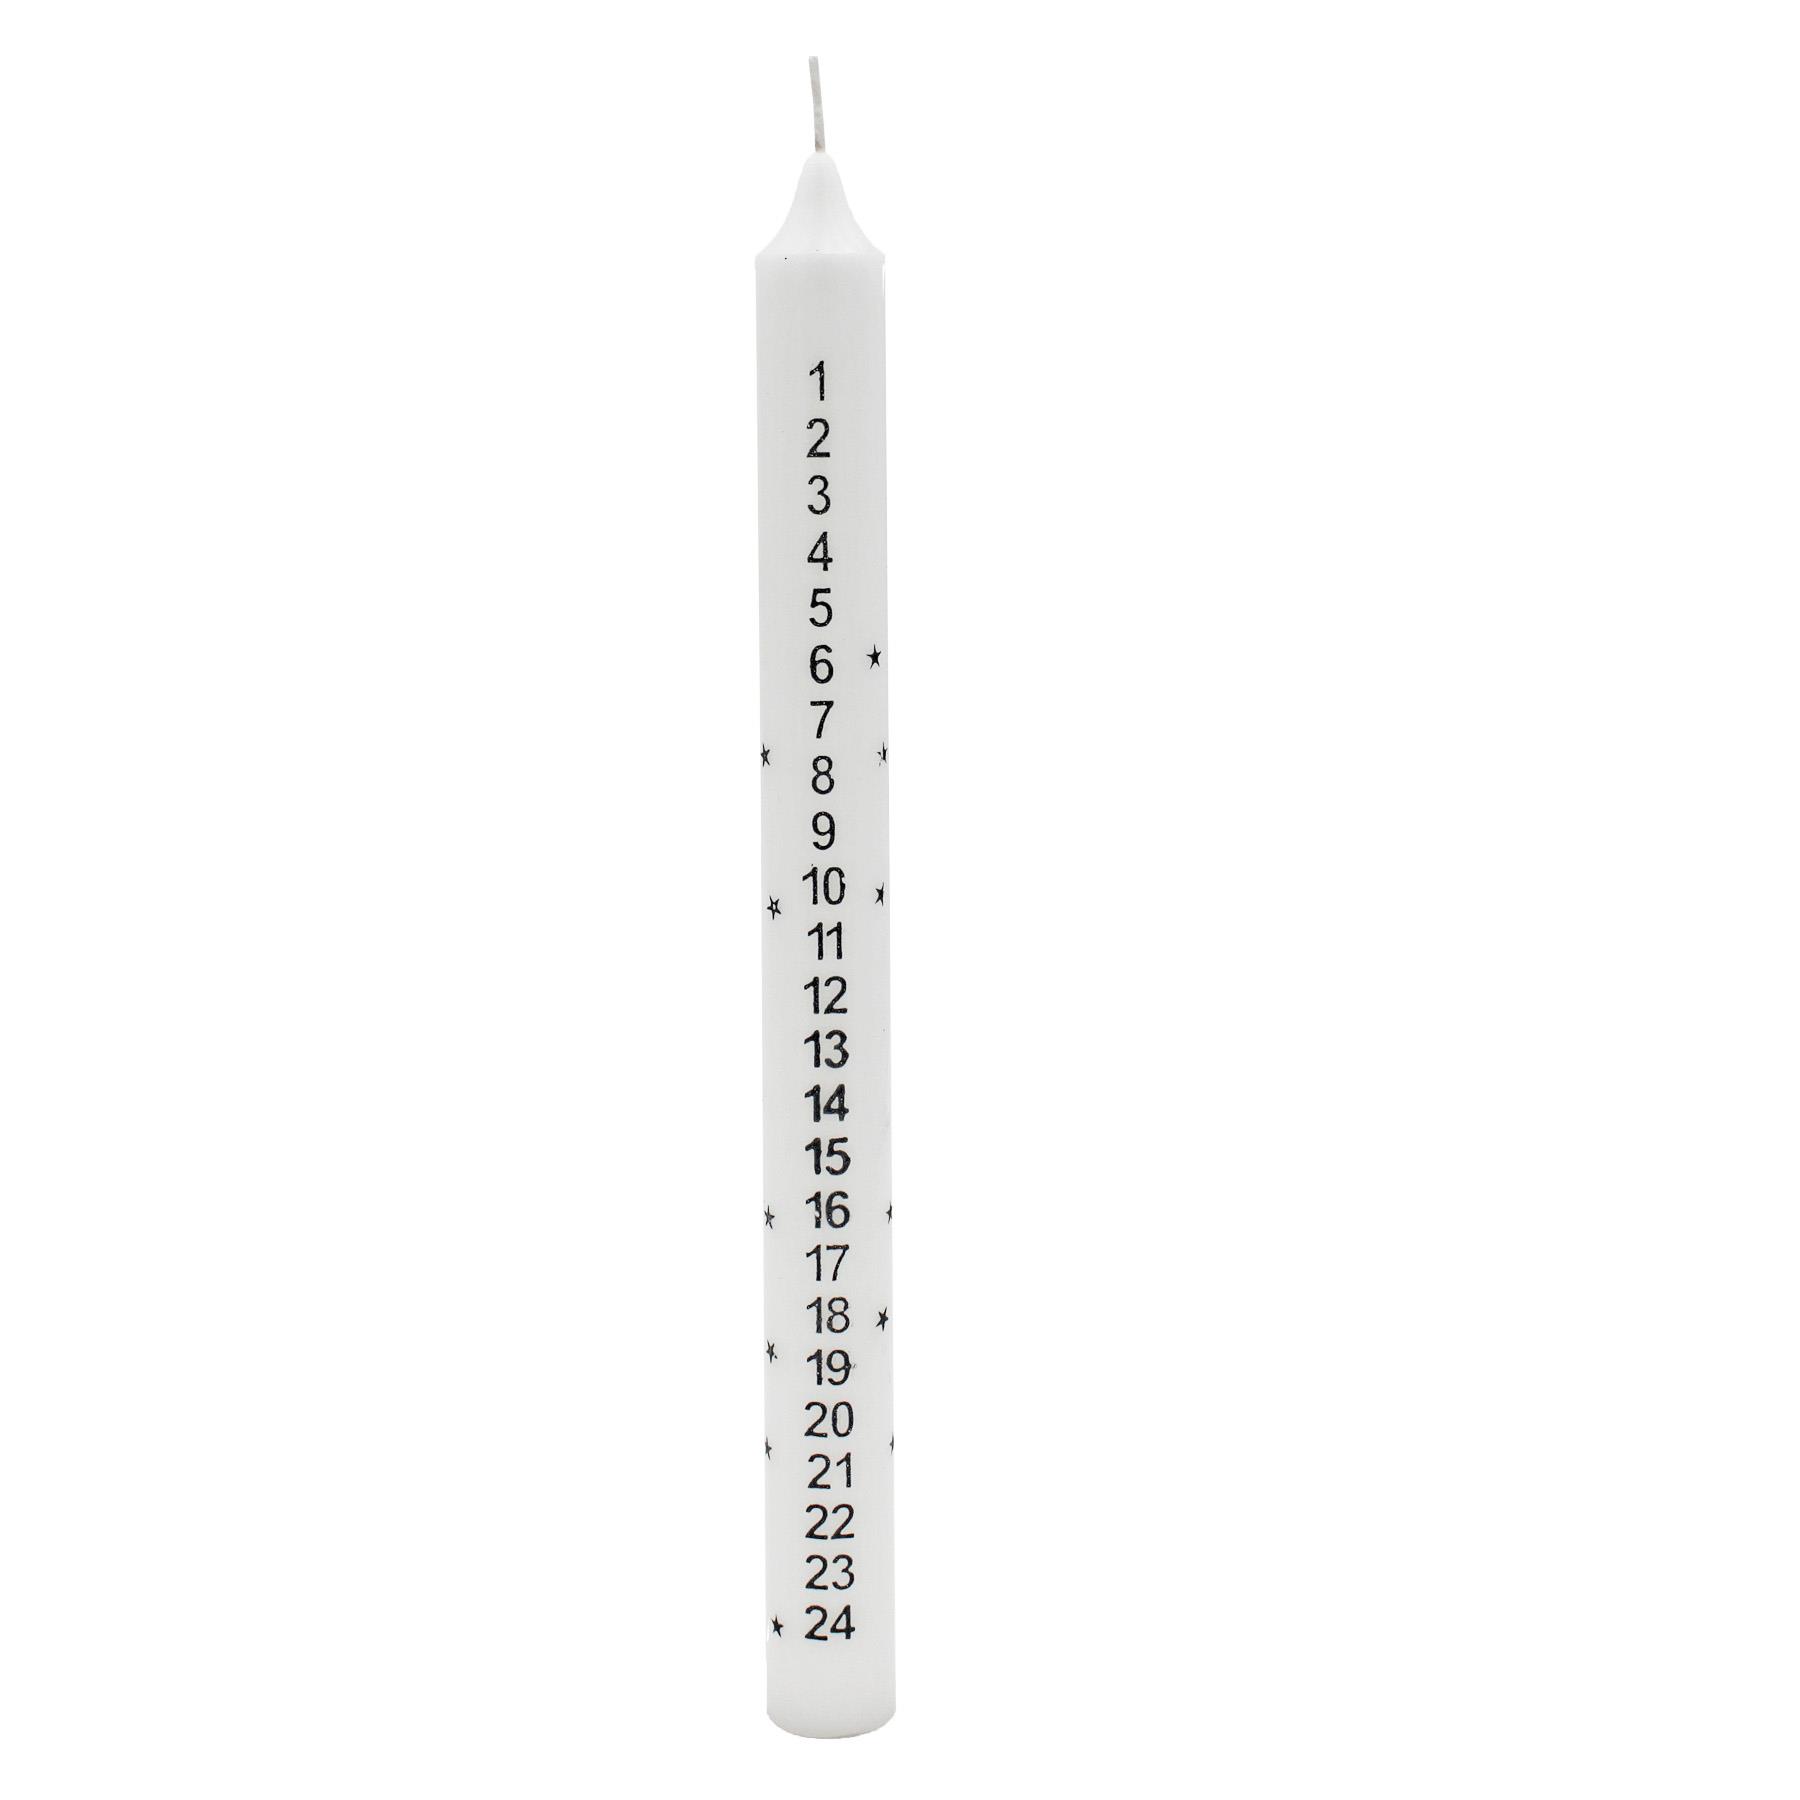 25cm Wax Advent Candle Christmas Countdown with Star Images - White